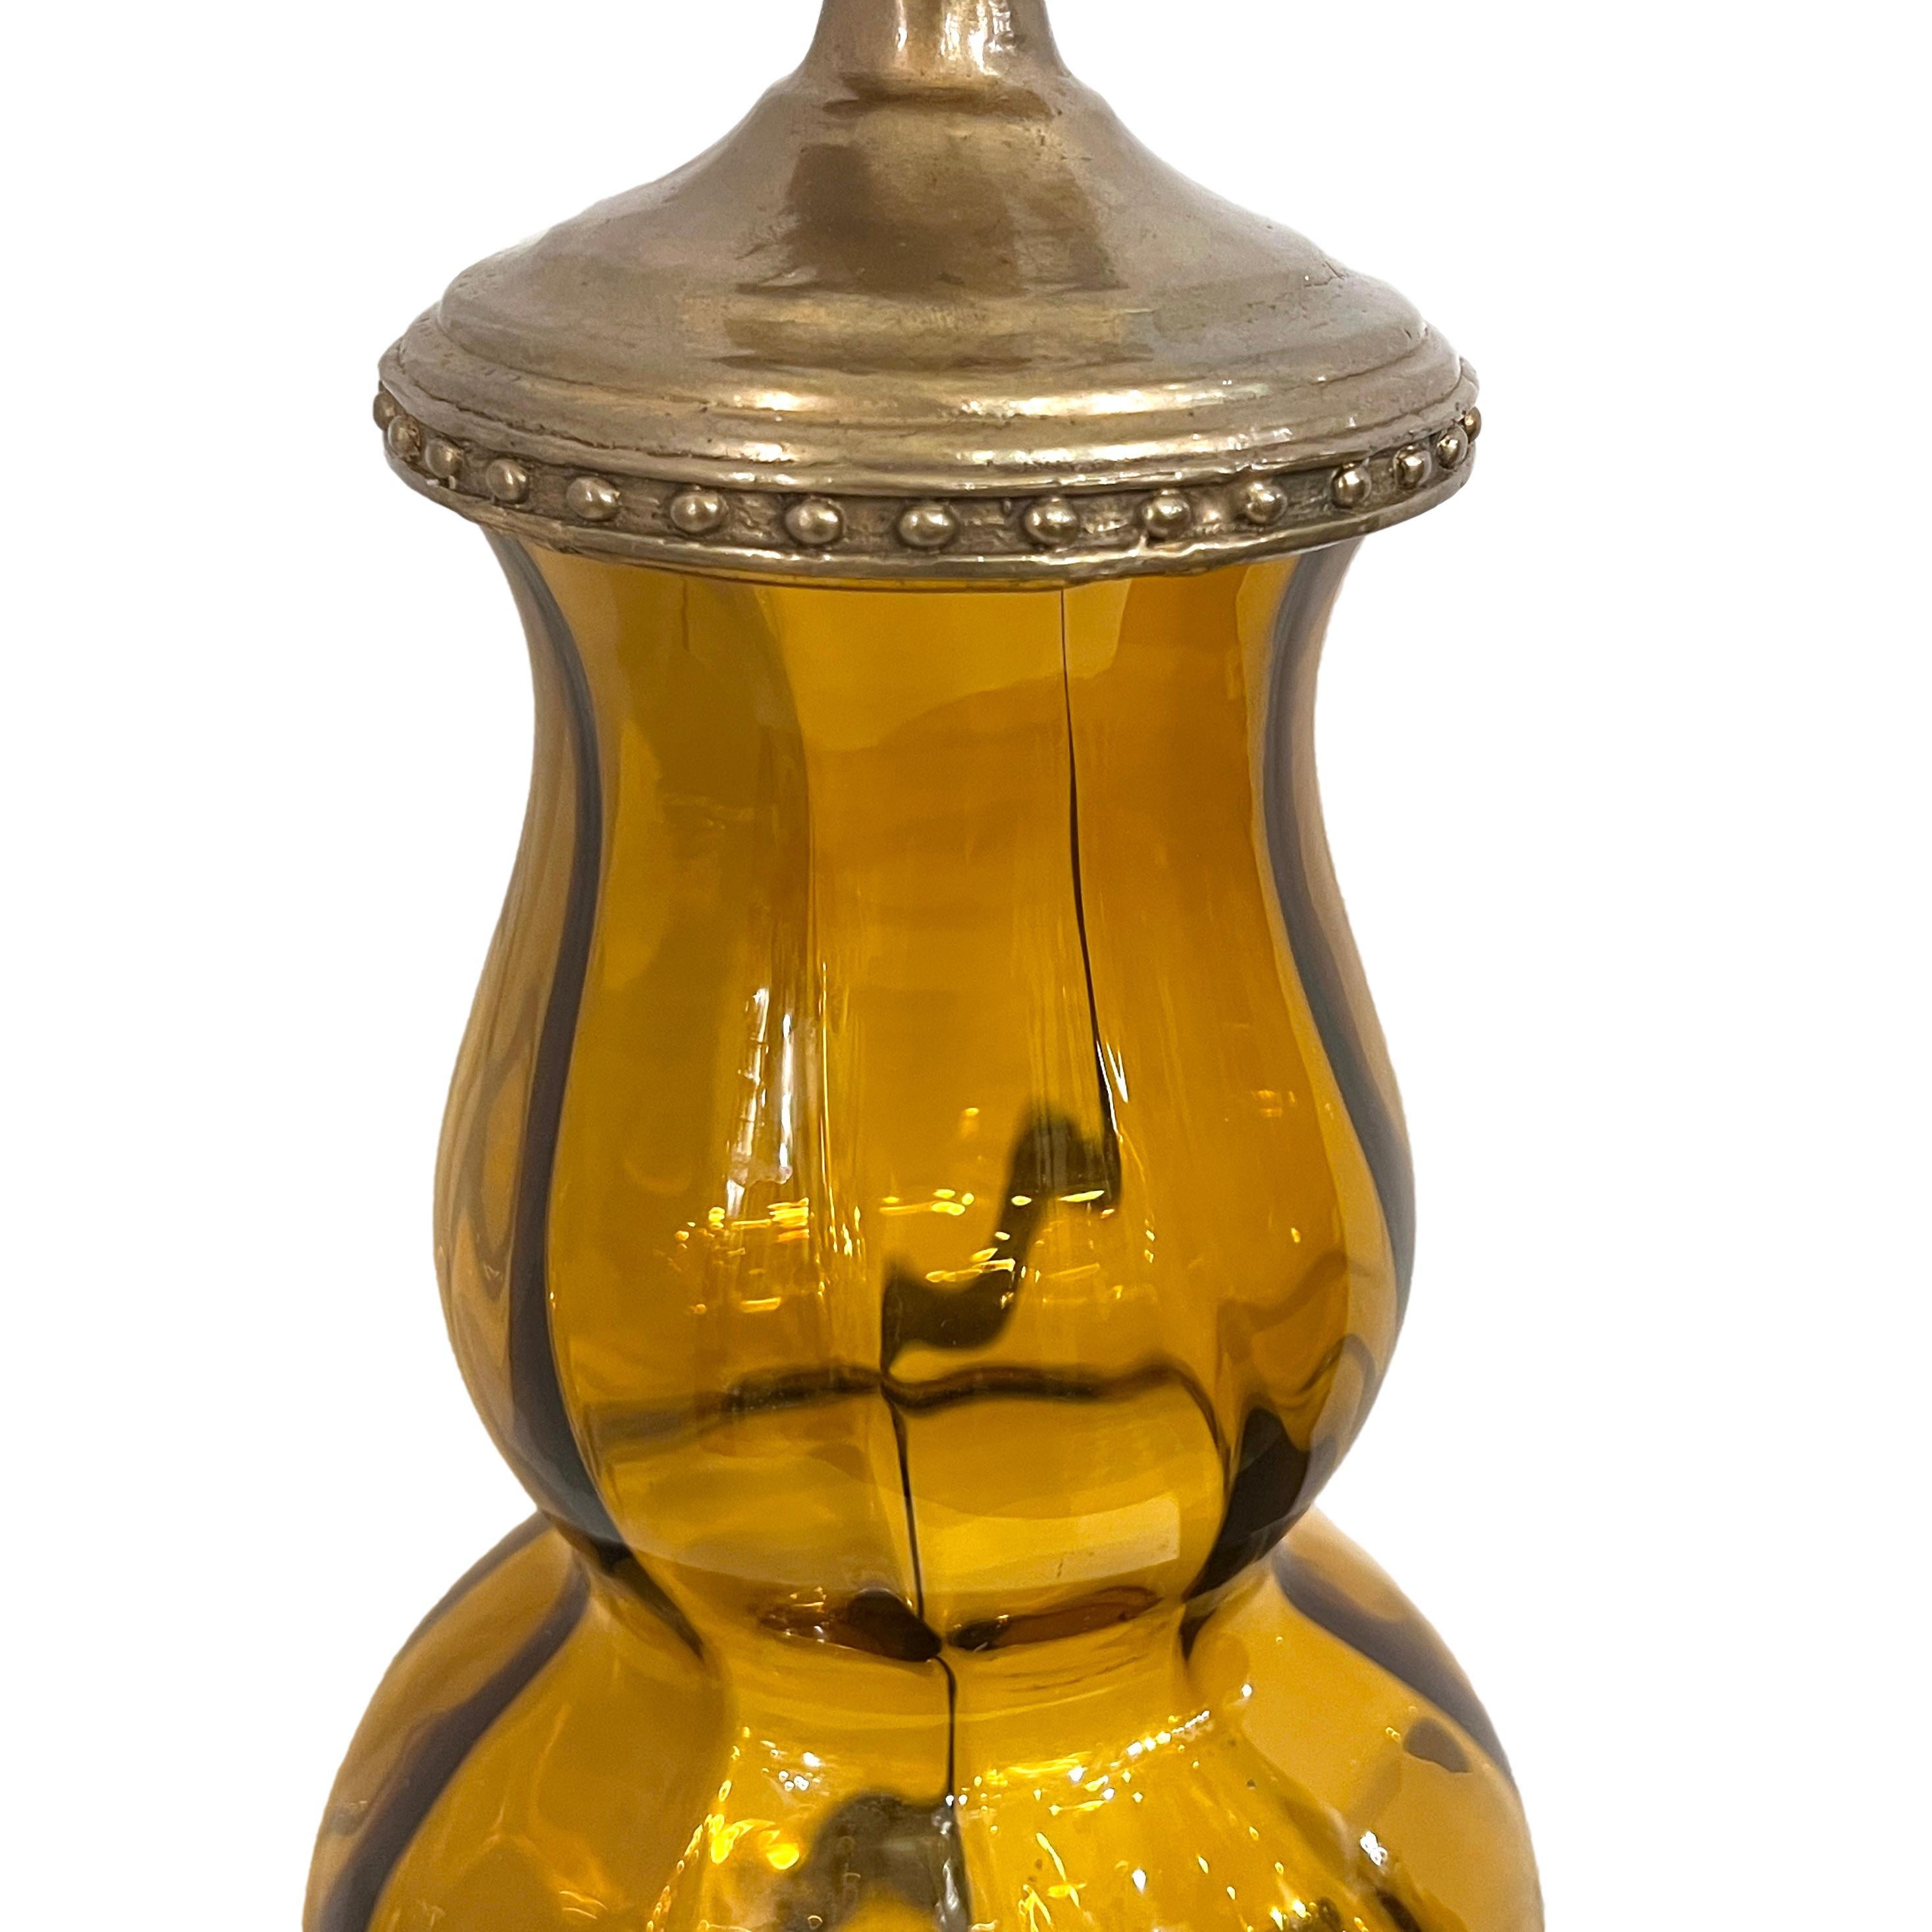 An Italian circa 1960s amber glass table lamp.

Measurements:
Height of body: 18.5